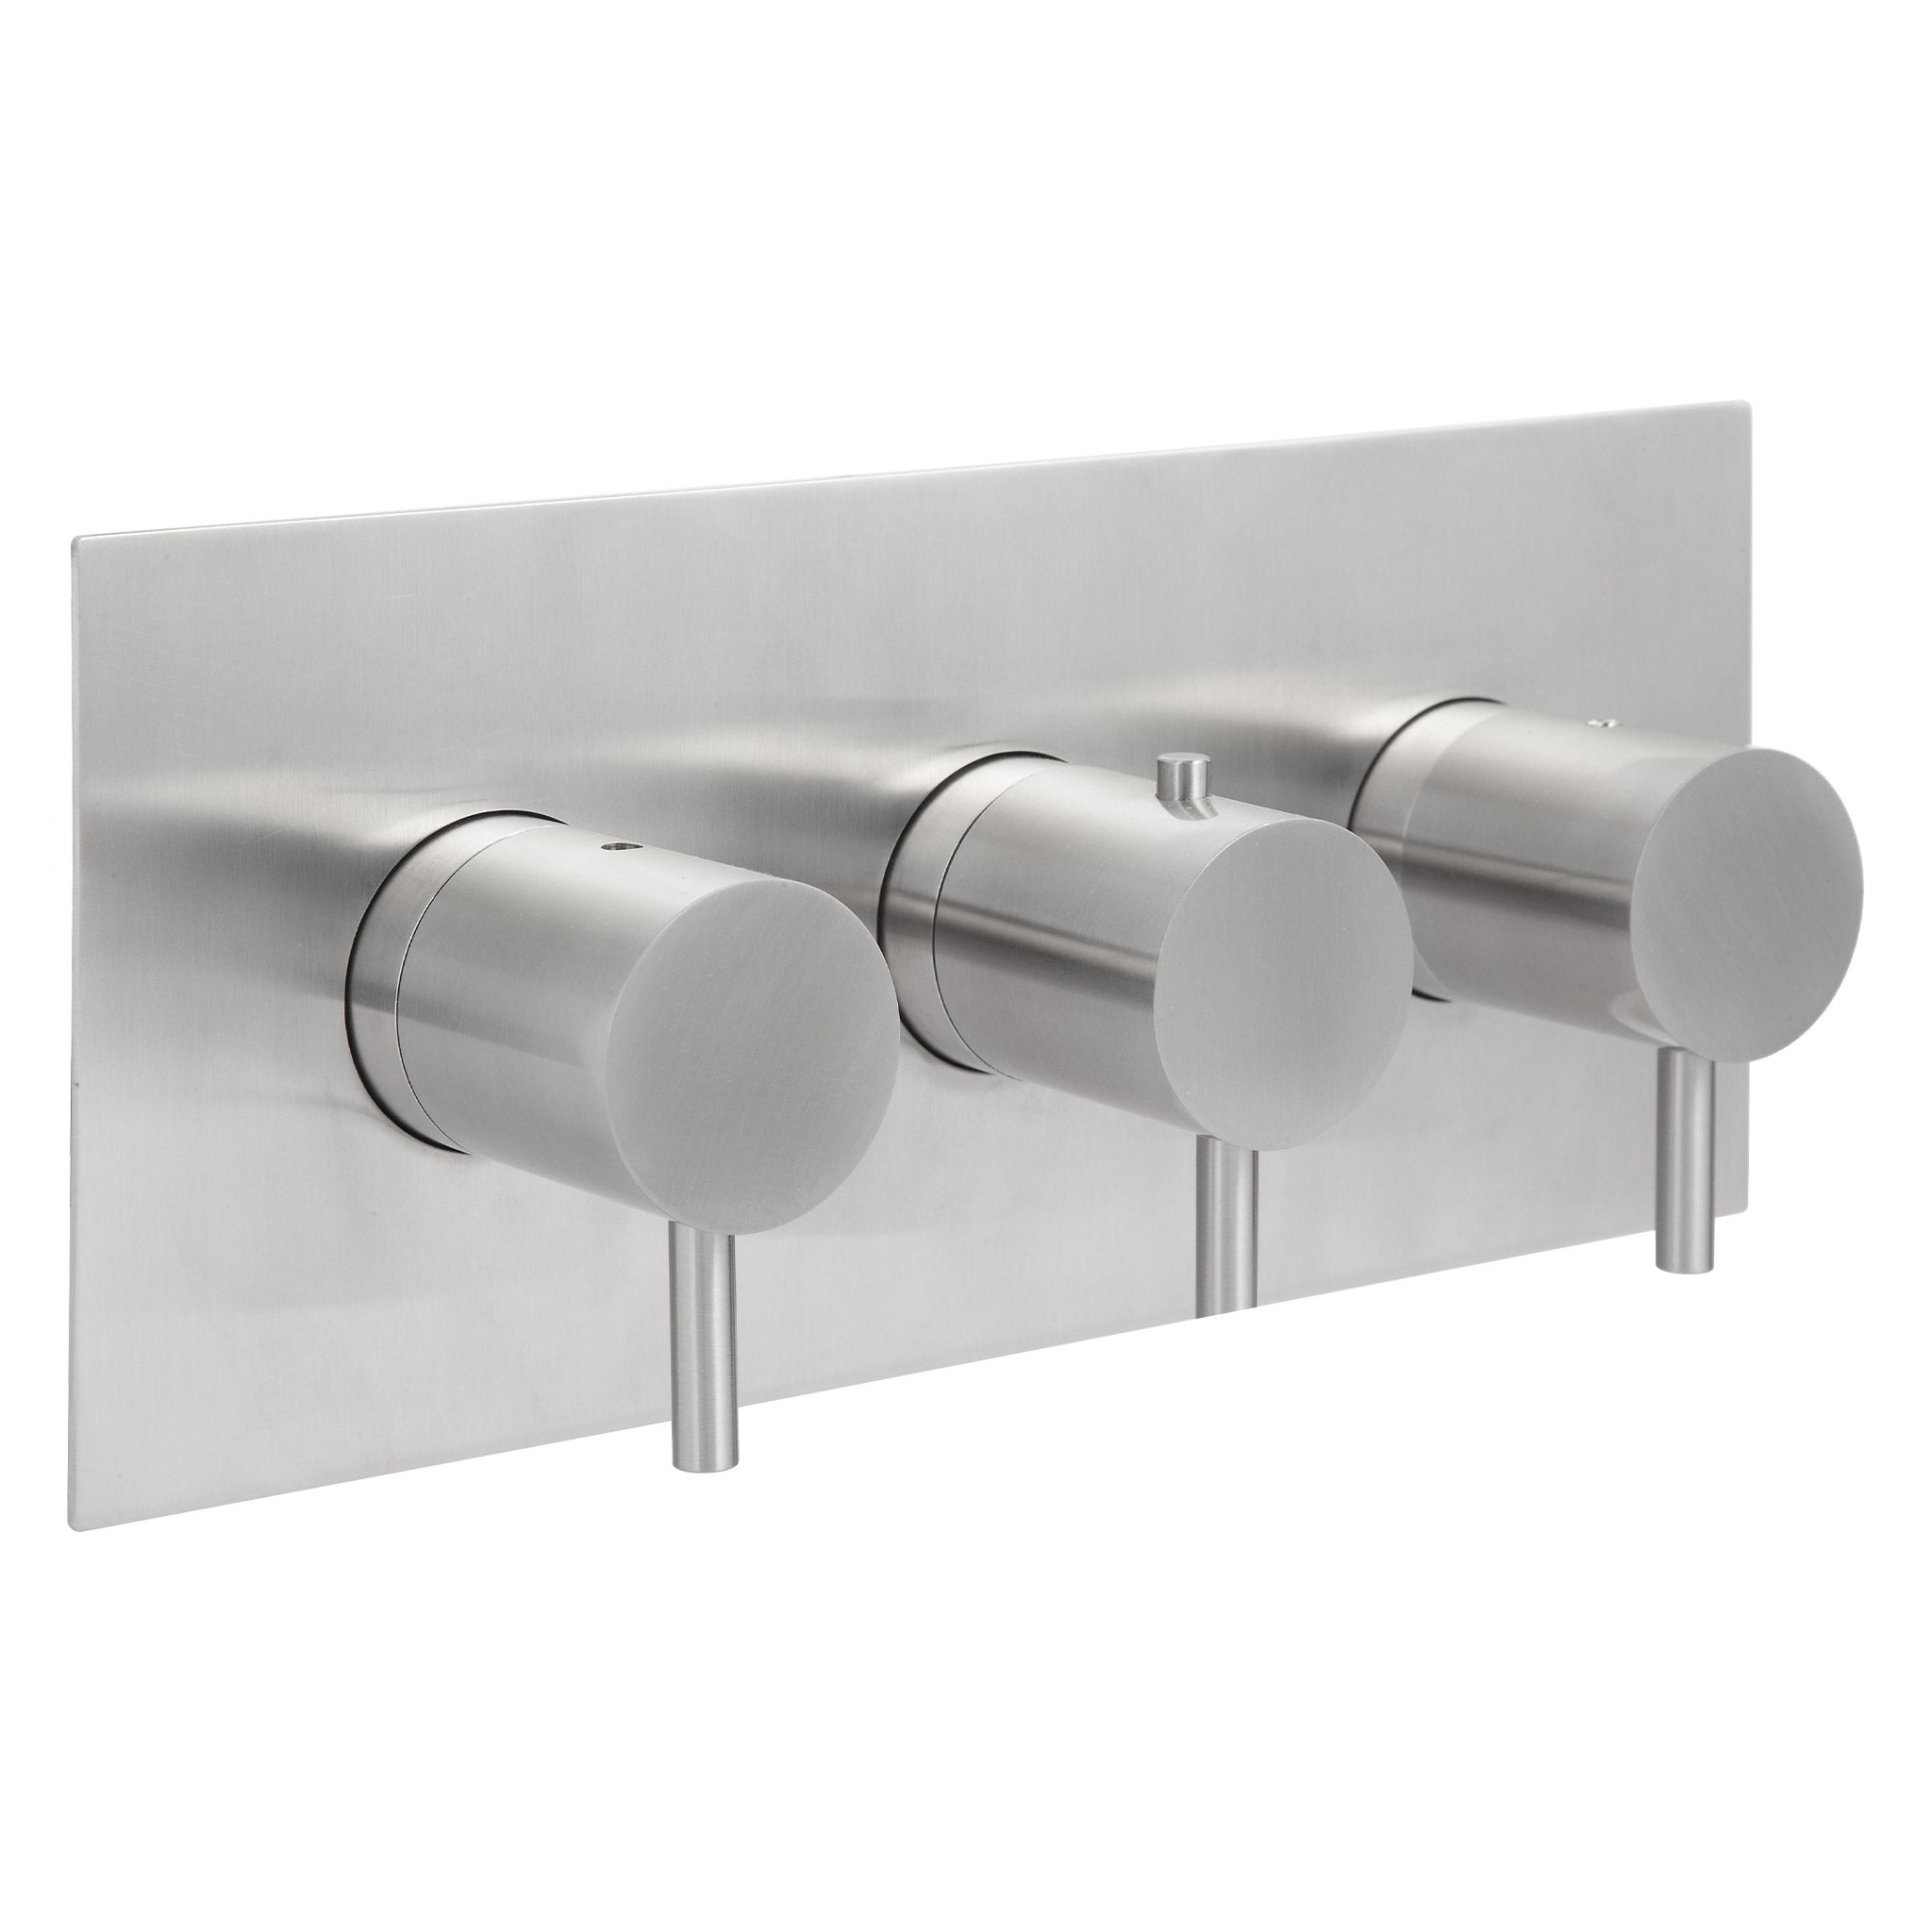 JTP Inox Thermostatic Concealed 2 Outlet 3 Controls Shower Valve Horizontal